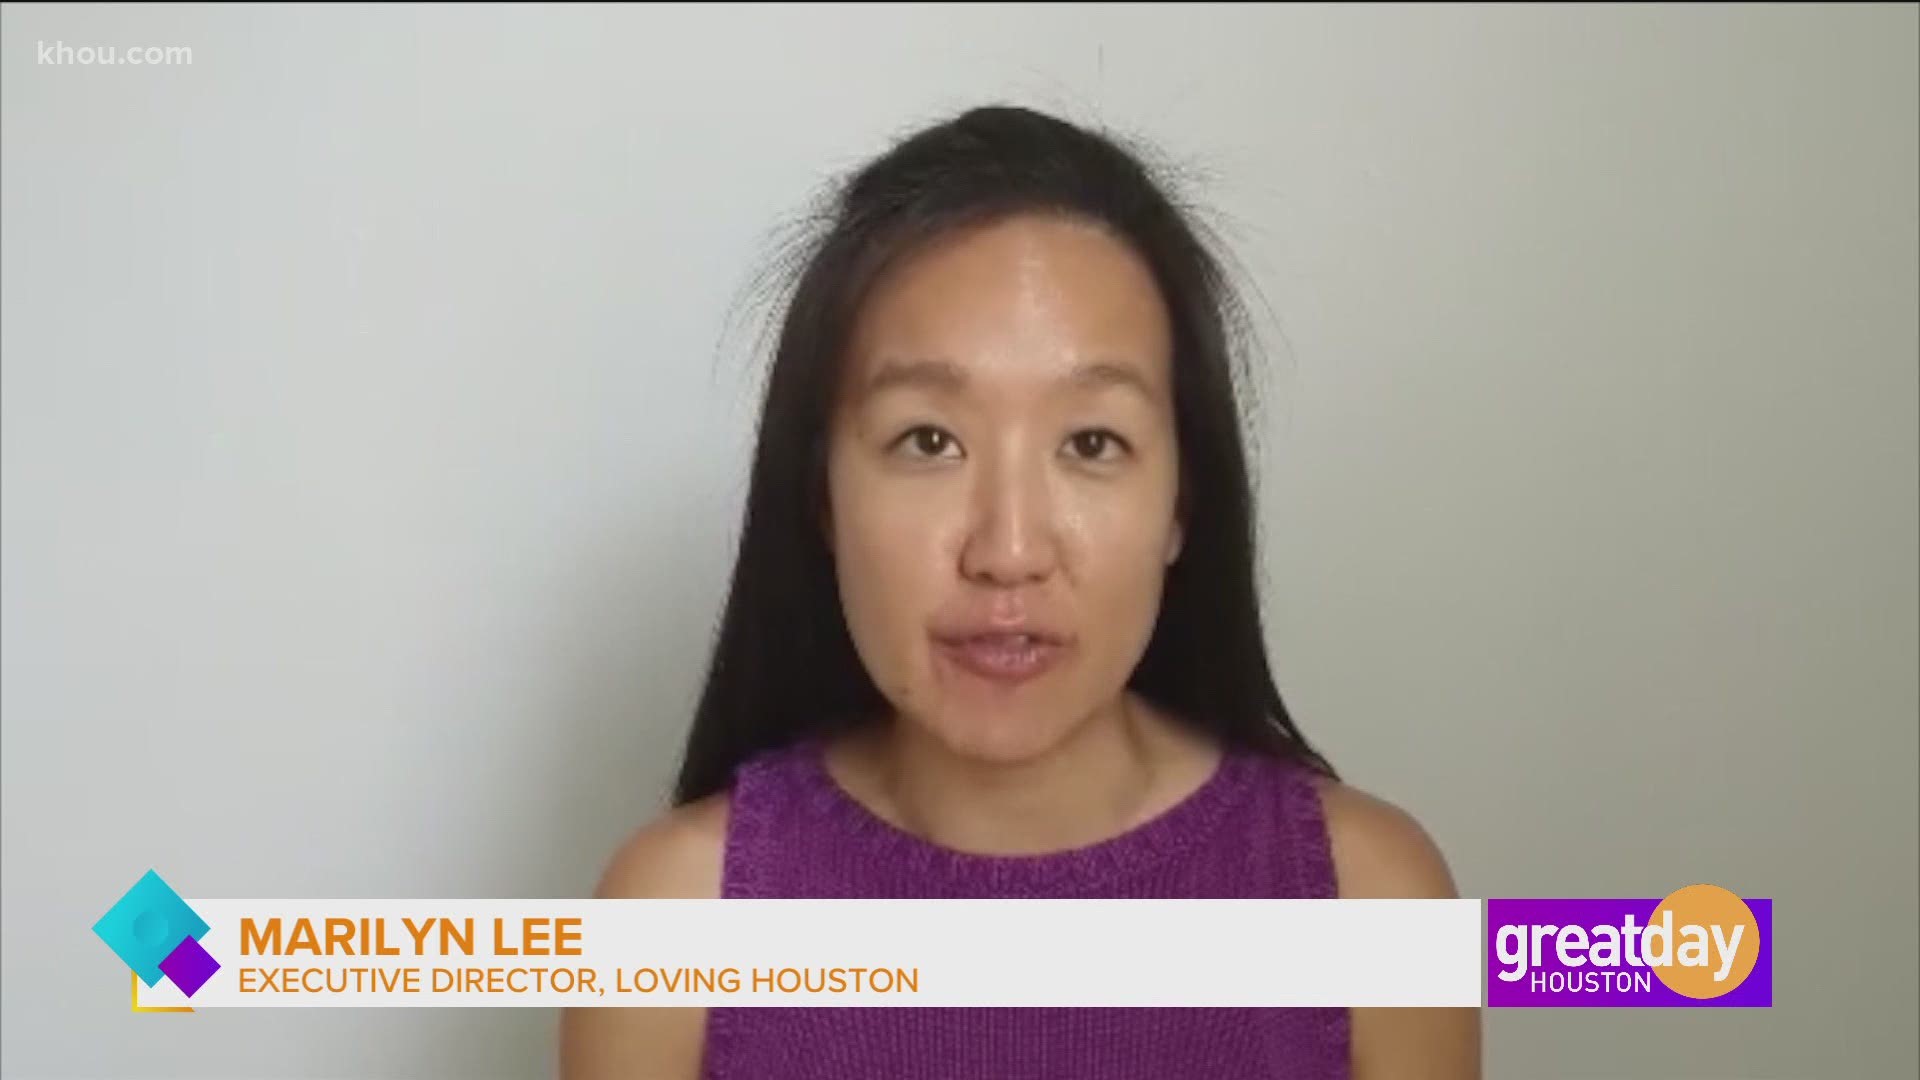 Marilyn Lee, Executive Director of Loving Houston is transforming the Greater Houston area by connecting churches to serve local schools.